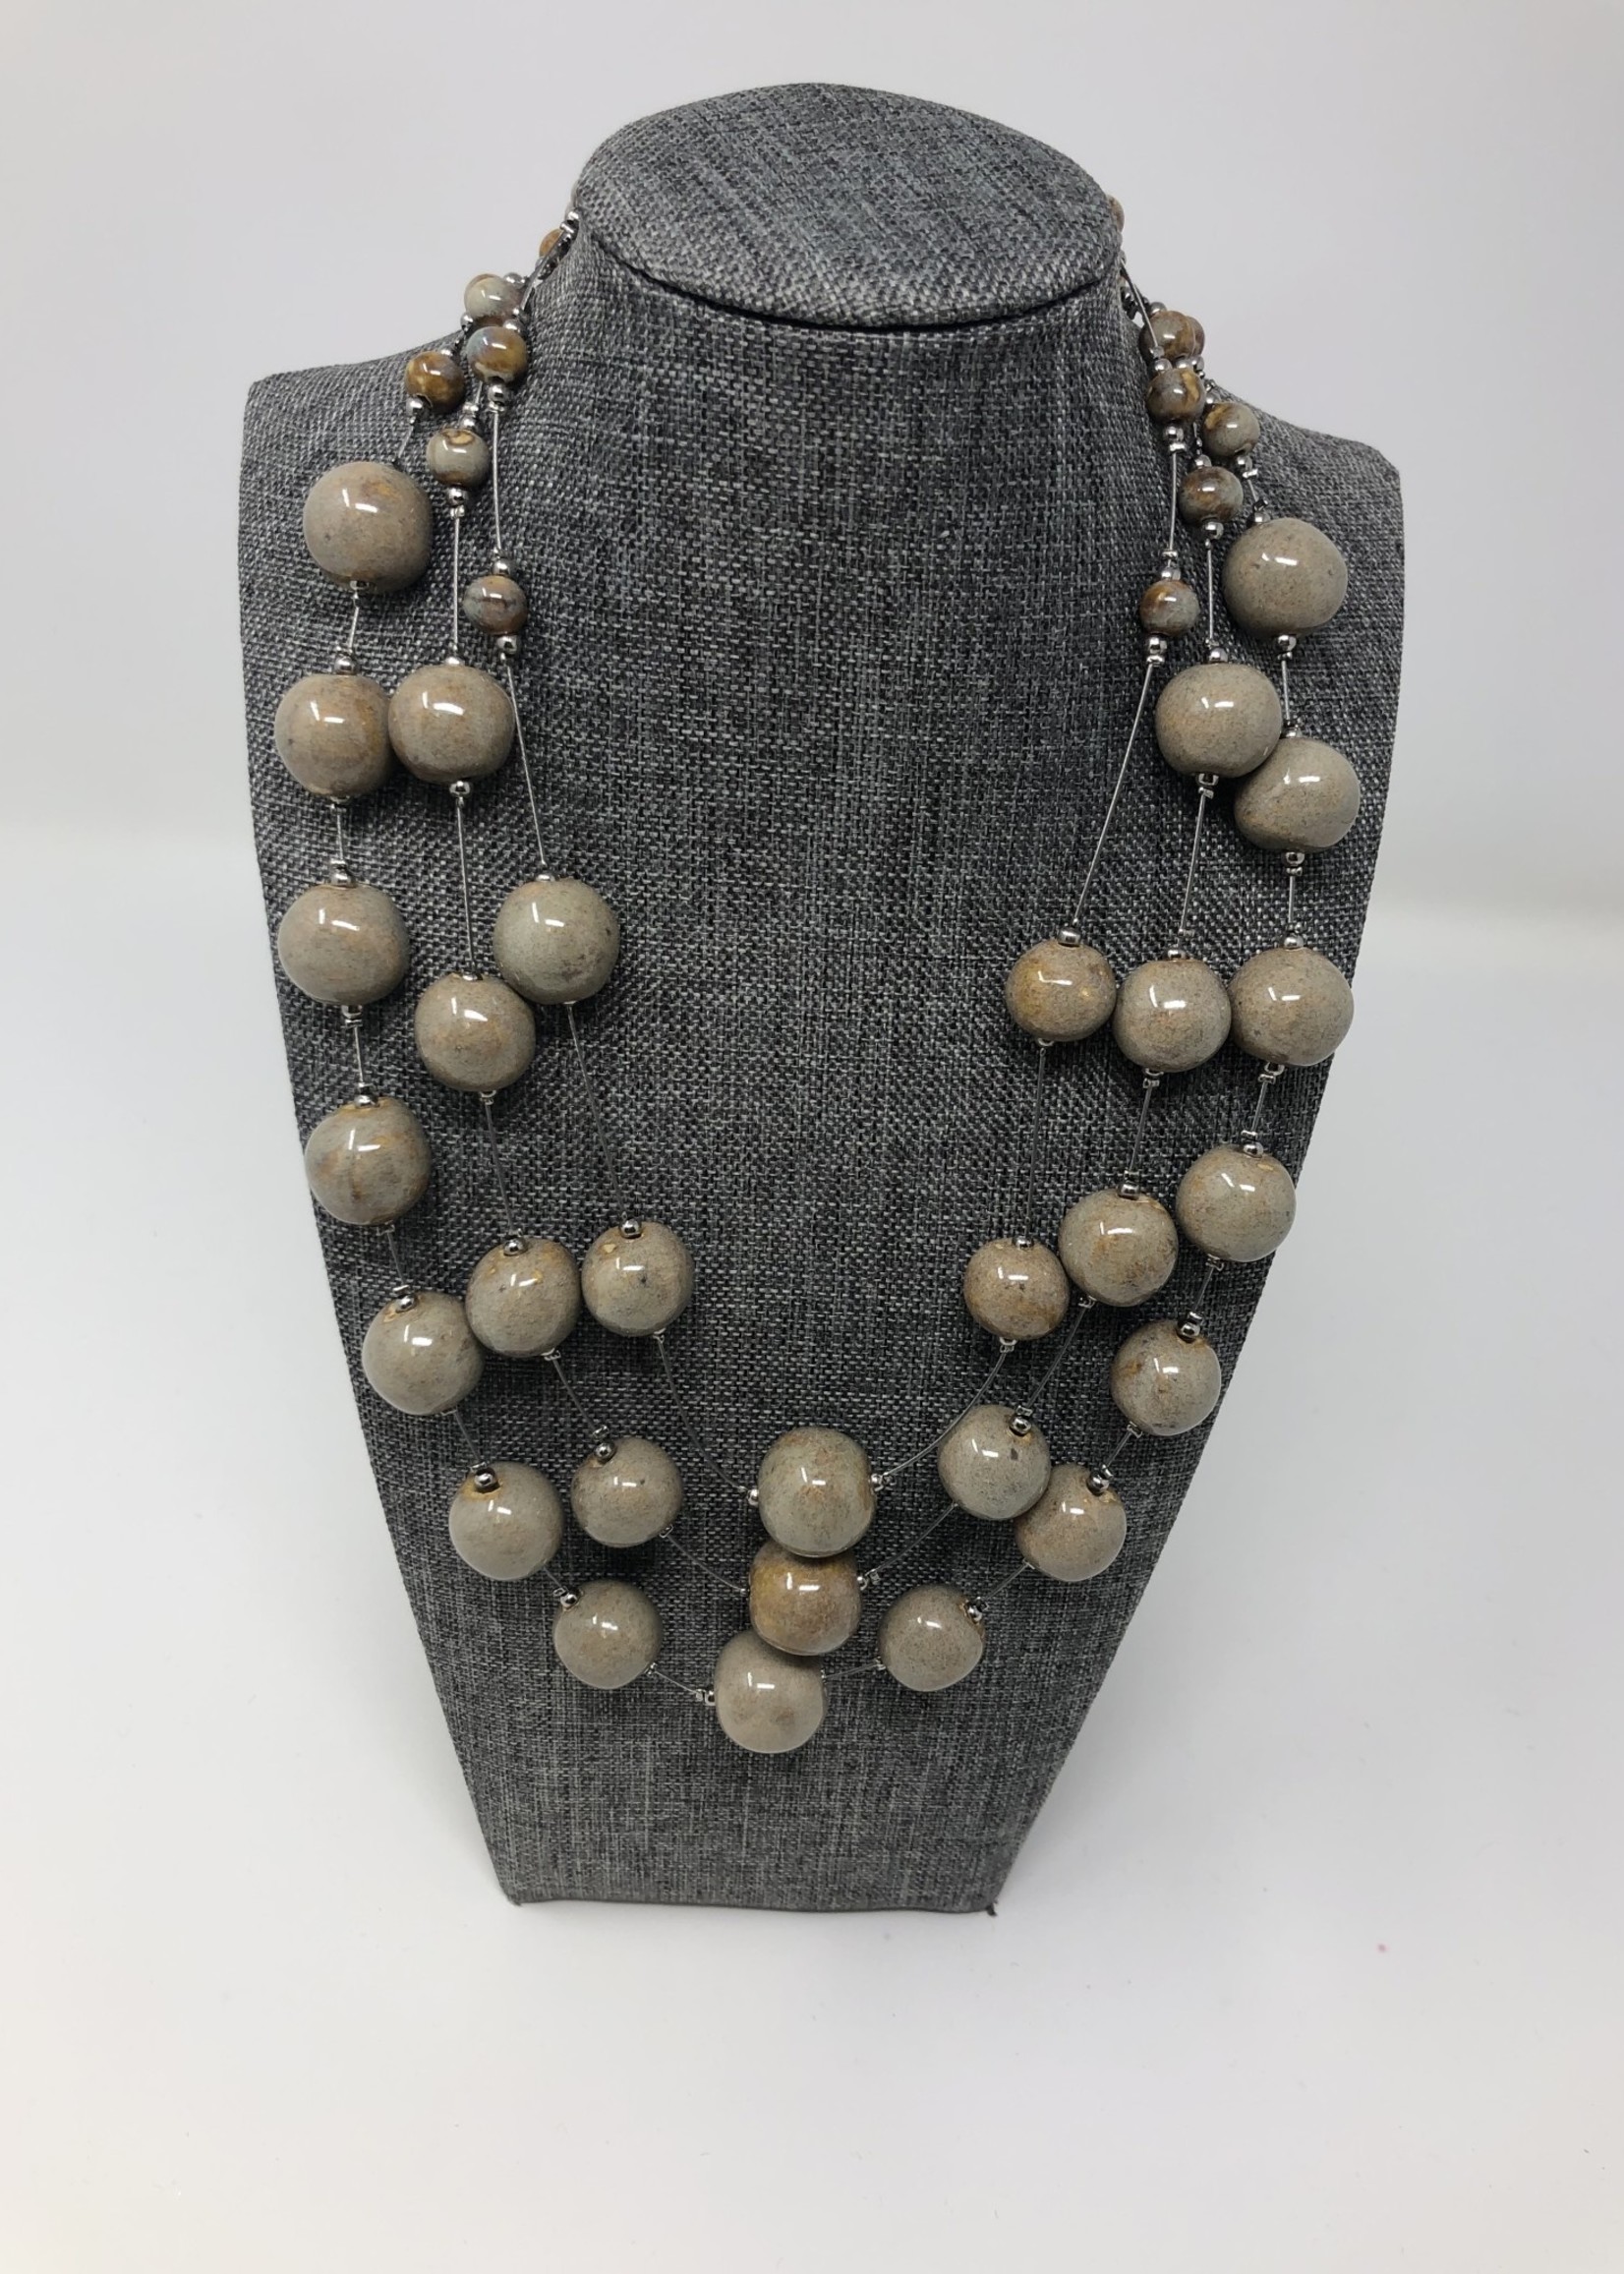 SKC 3 TIERED BEADED NECKLACE